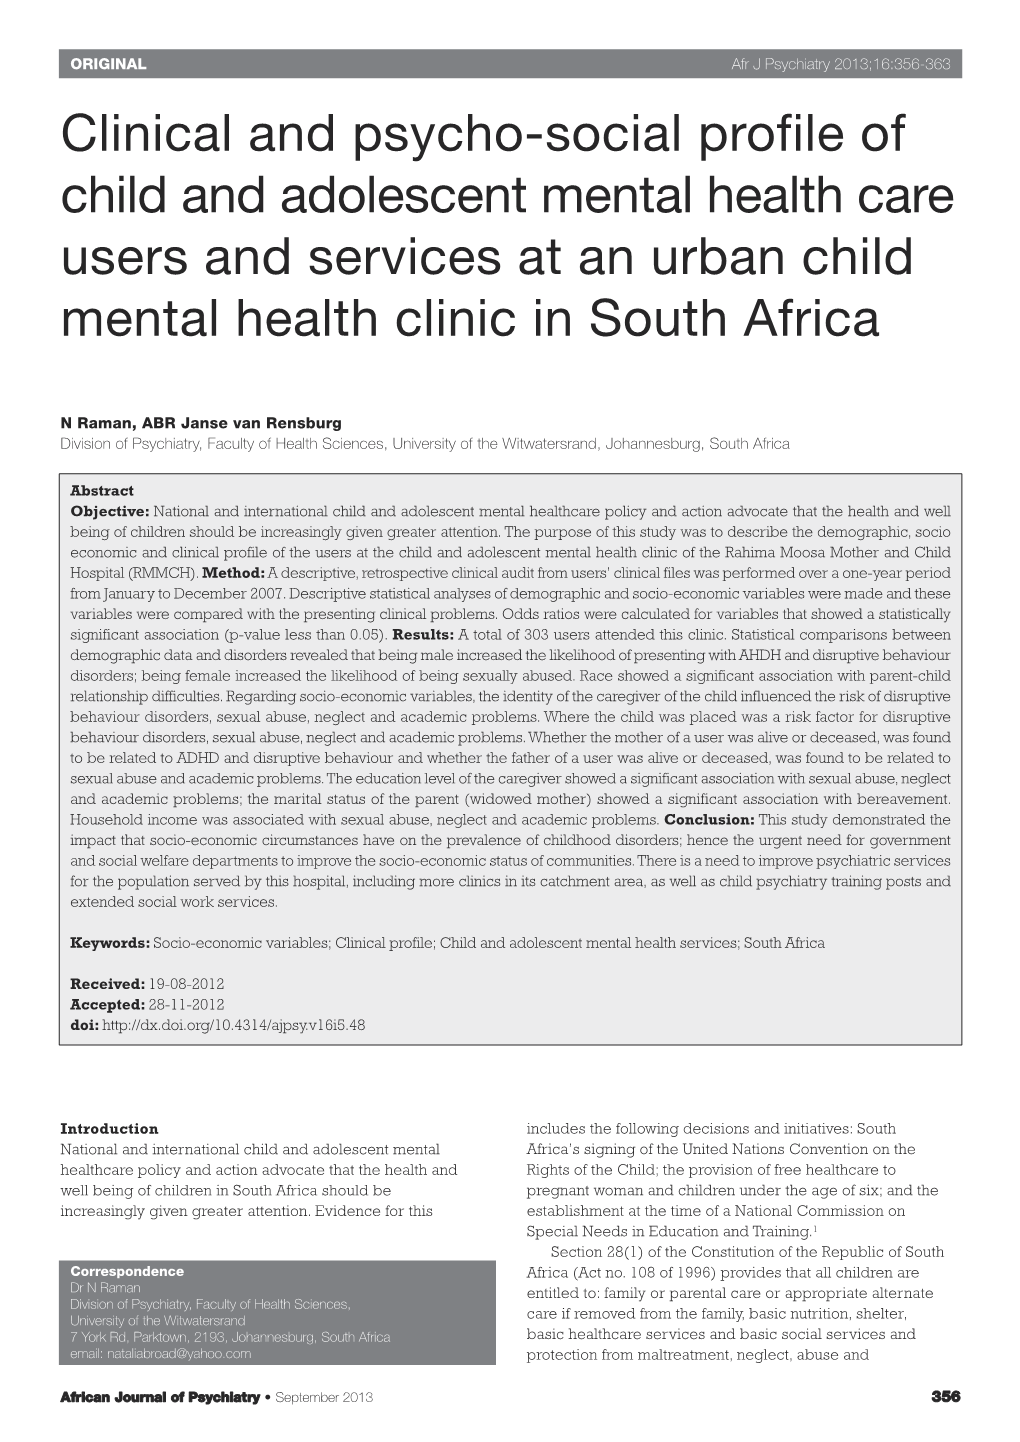 Clinical and Psycho-Social Profile of Child and Adolescent Mental Health Care Users and Services at an Urban Child Mental Health Clinic in South Africa